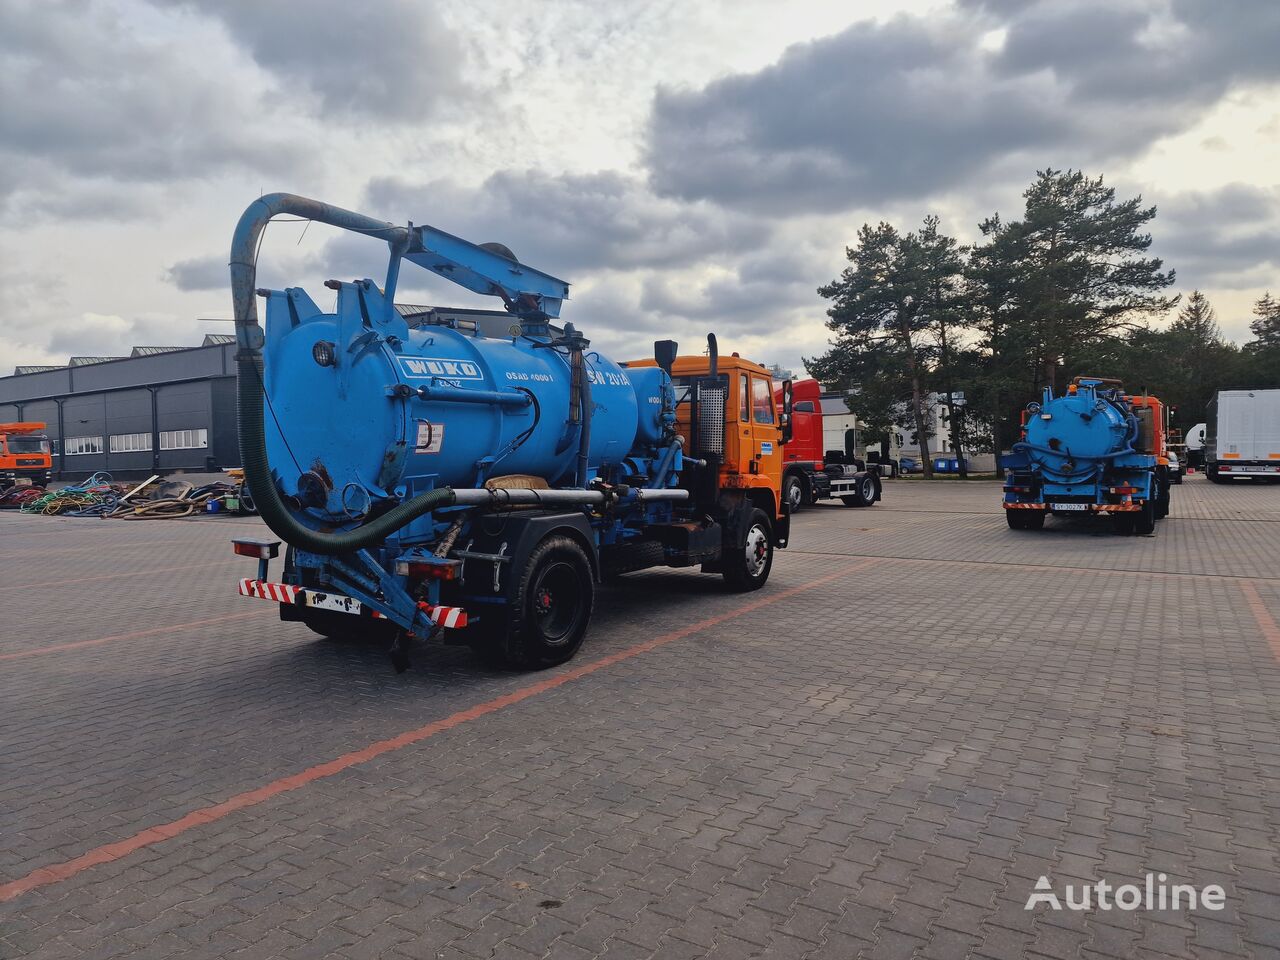 асенізатор Star WUKO SWS-201A COMBI FOR DUCT CLEANING